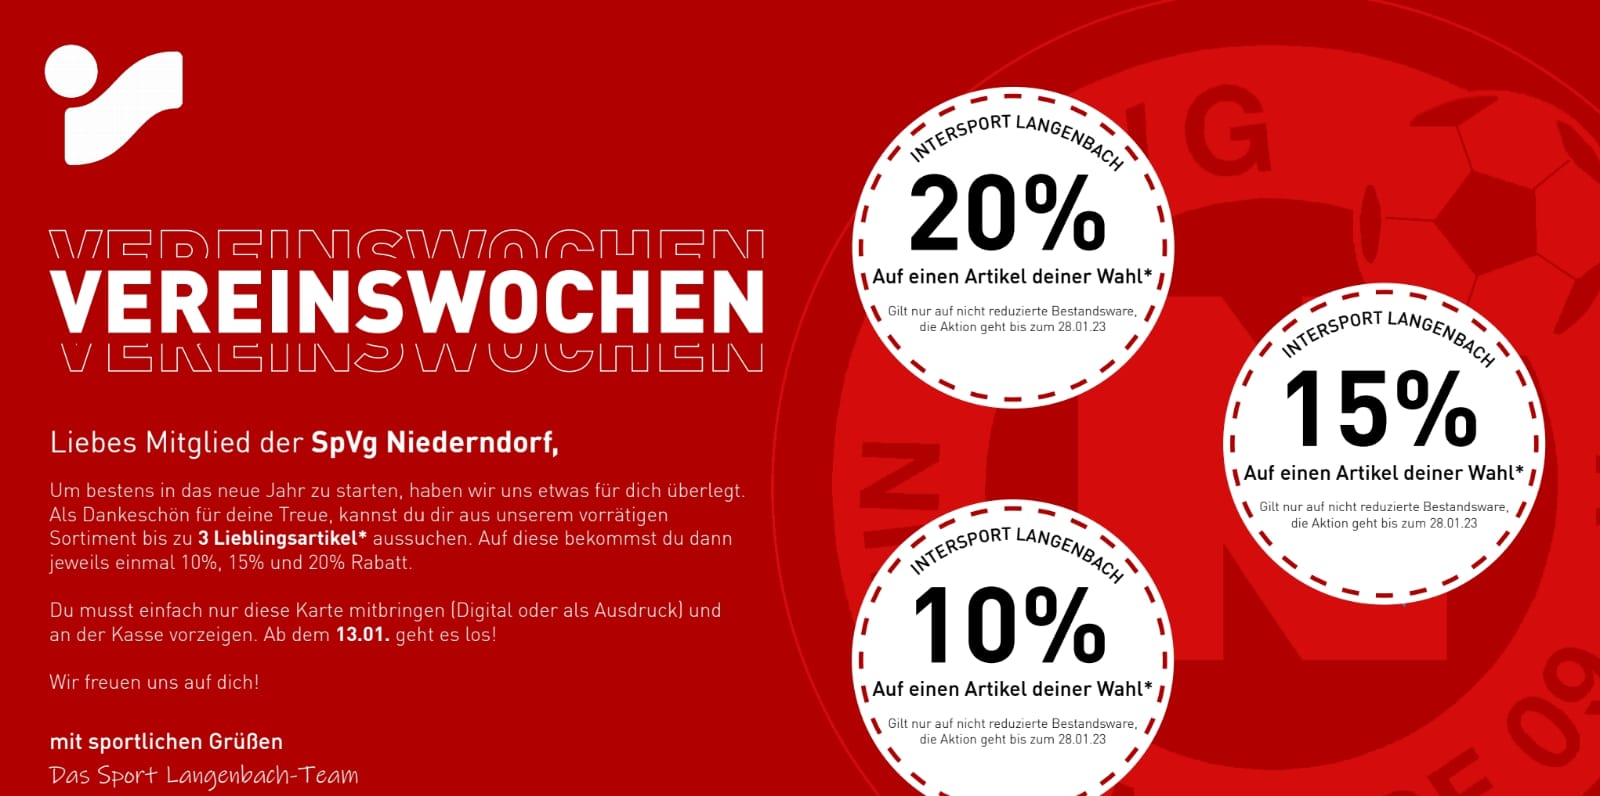 You are currently viewing Vereinswochen bei Intersport Langenbach